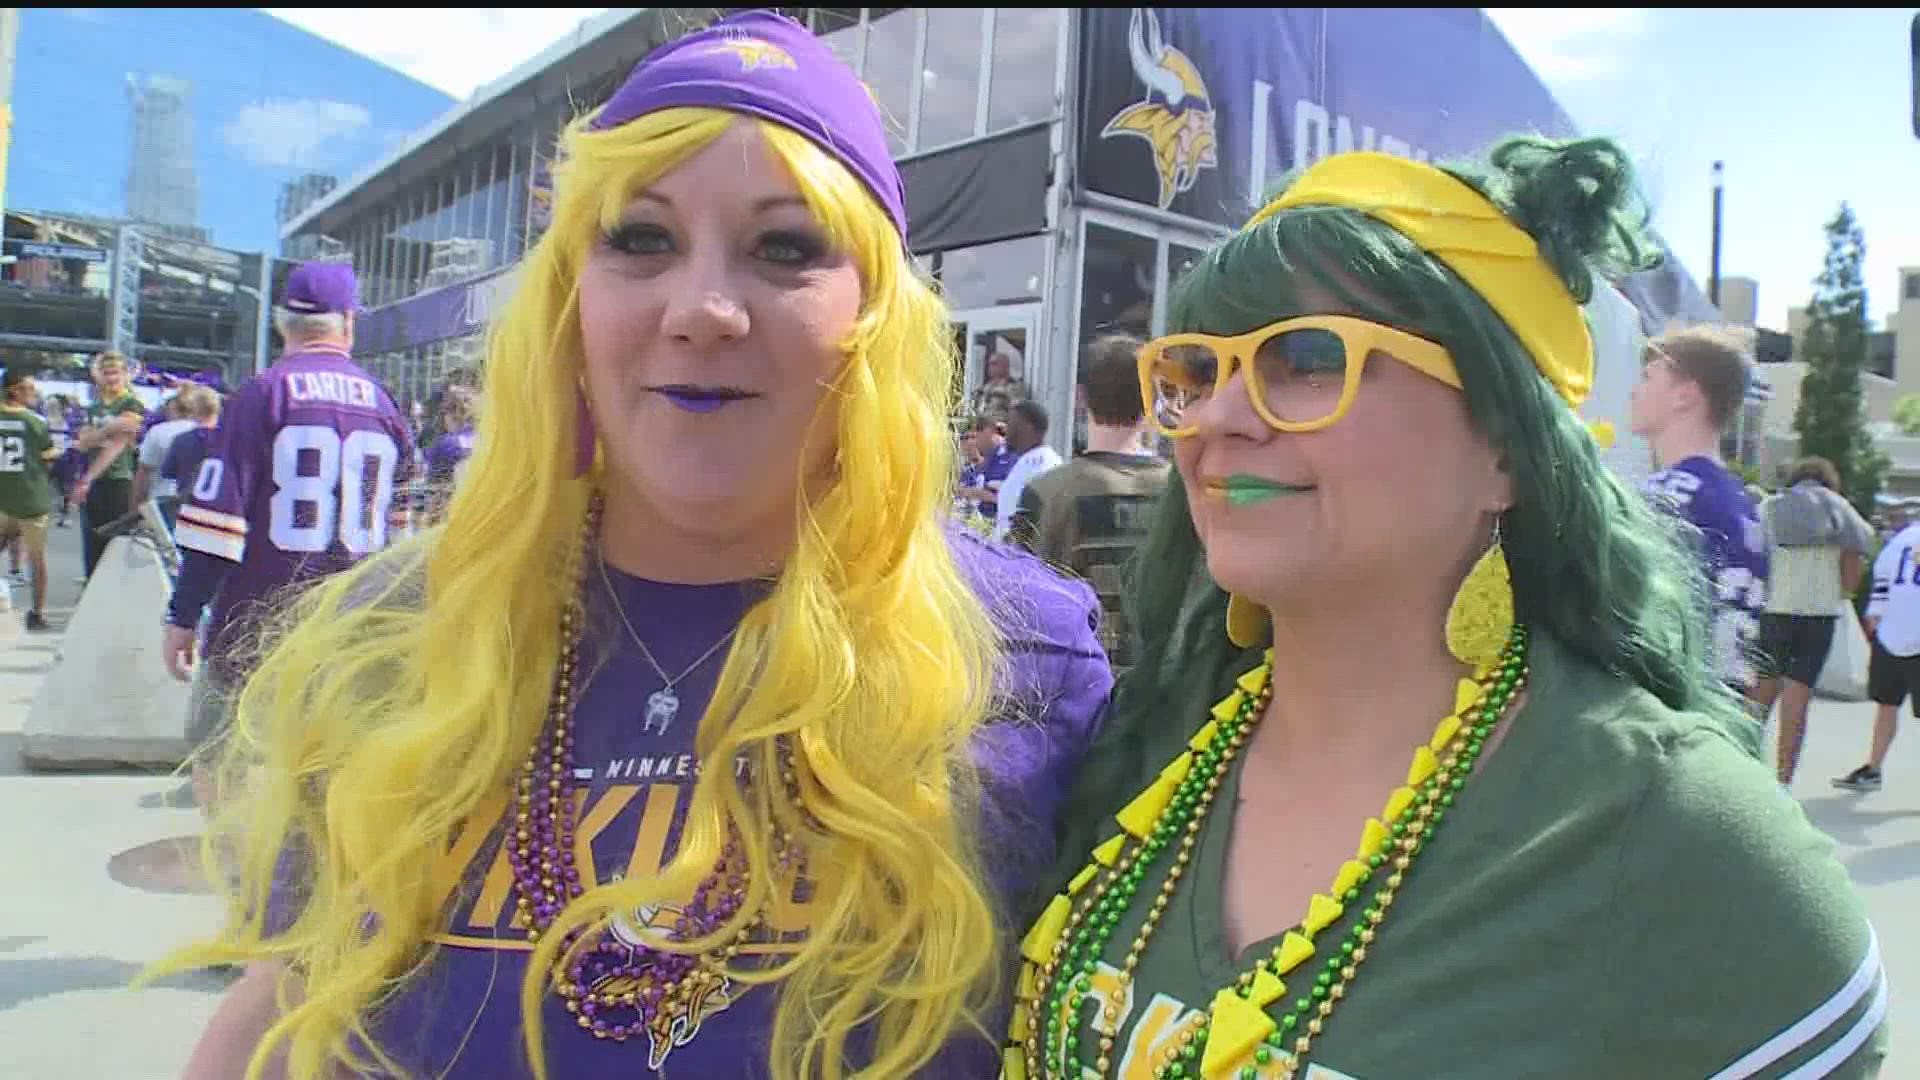 Tens of thousands of football fans are in downtown Minneapolis for the start of new Vikings season.